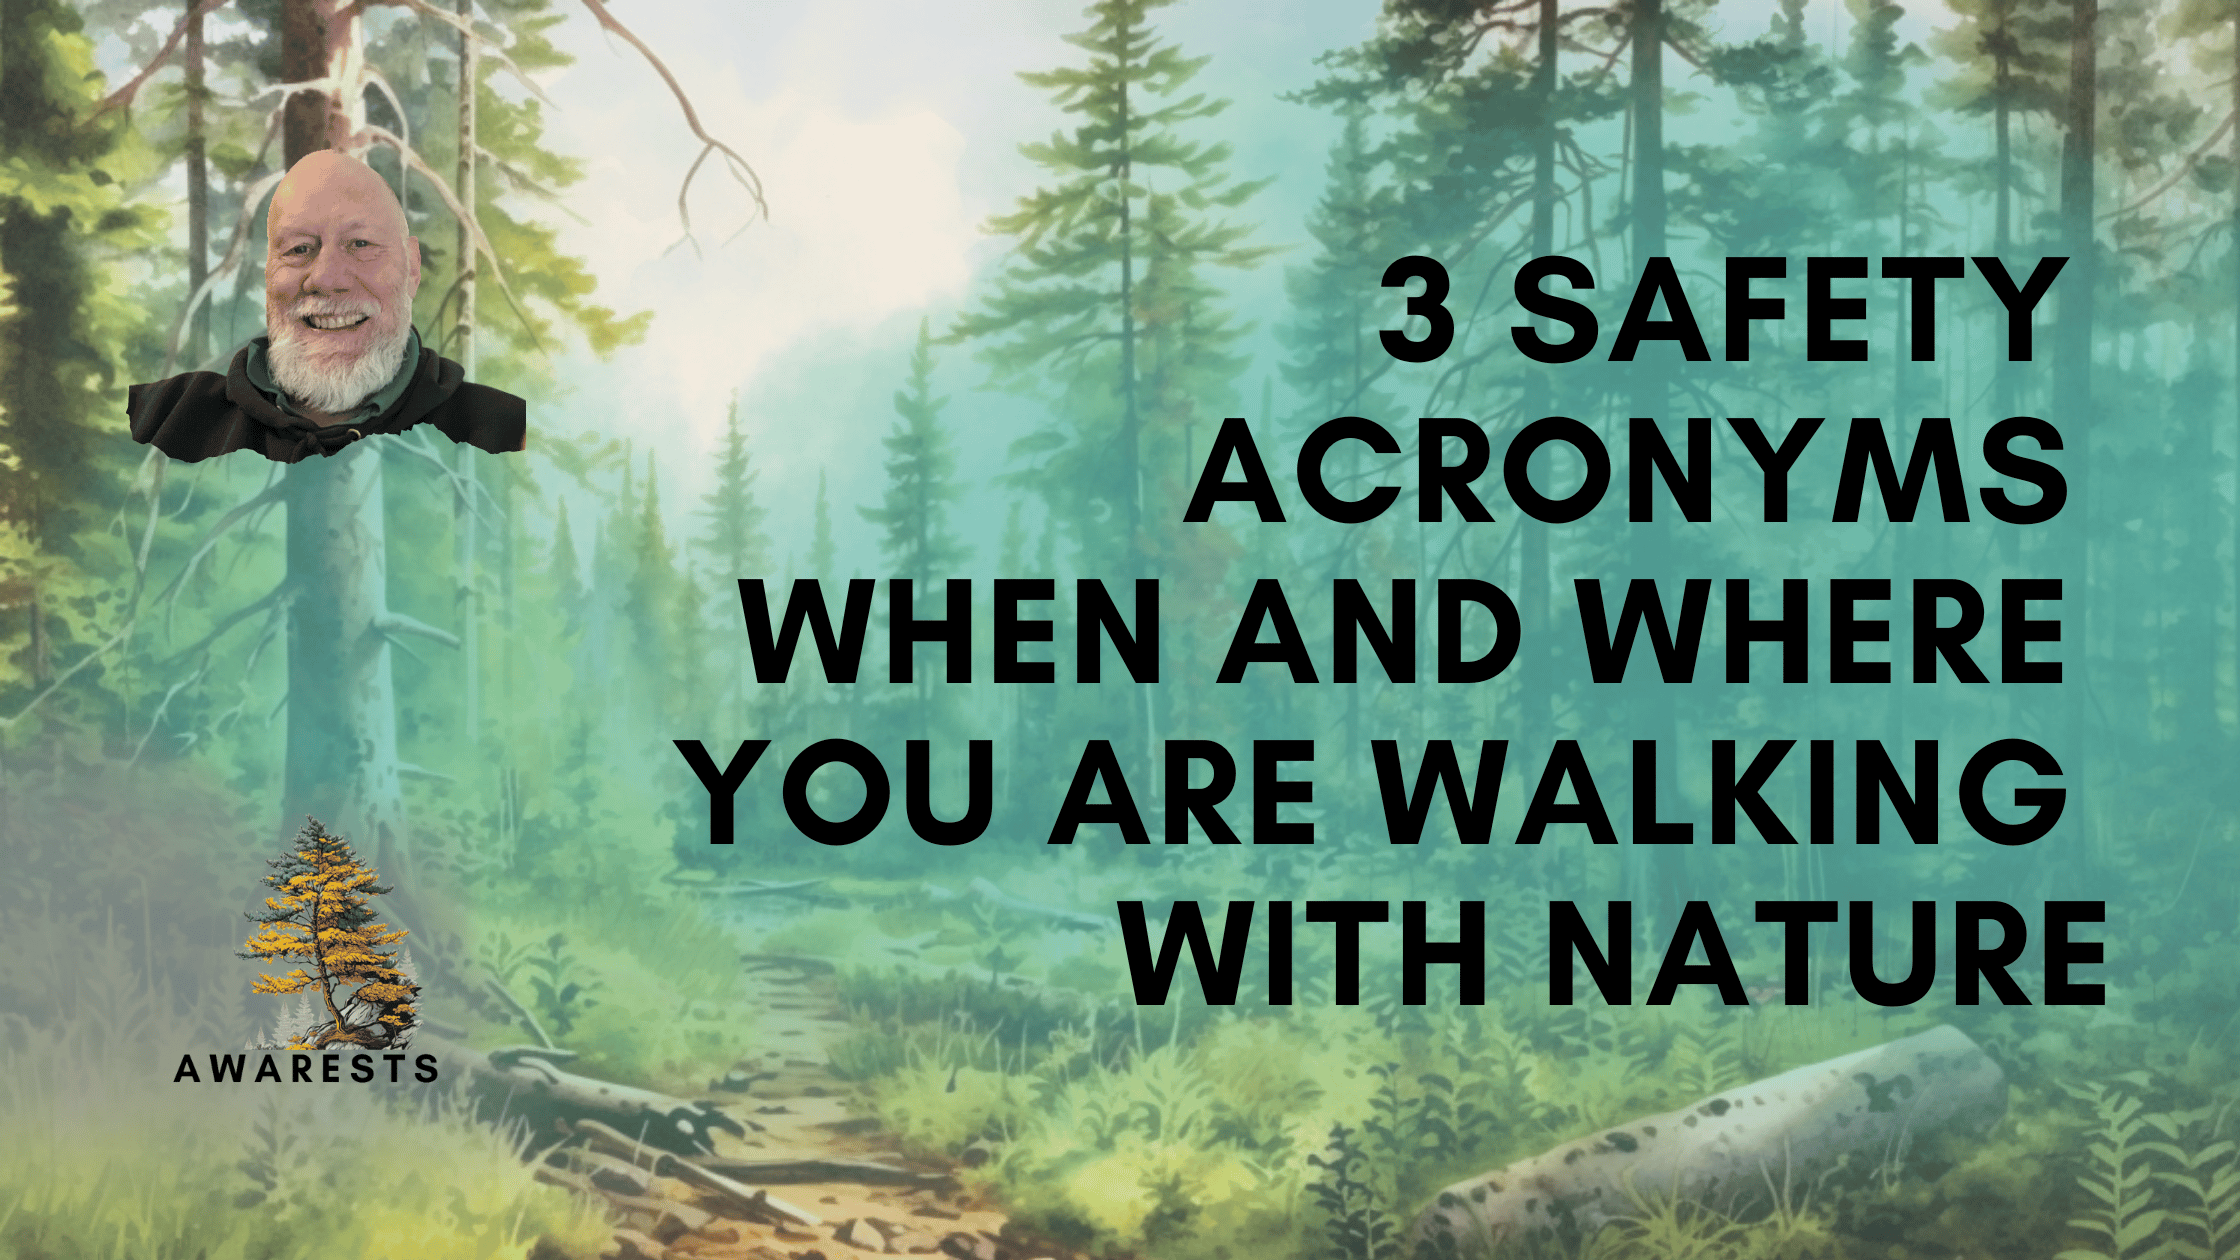 3 Safety Acronyms When and Where You Are Walking with Nature